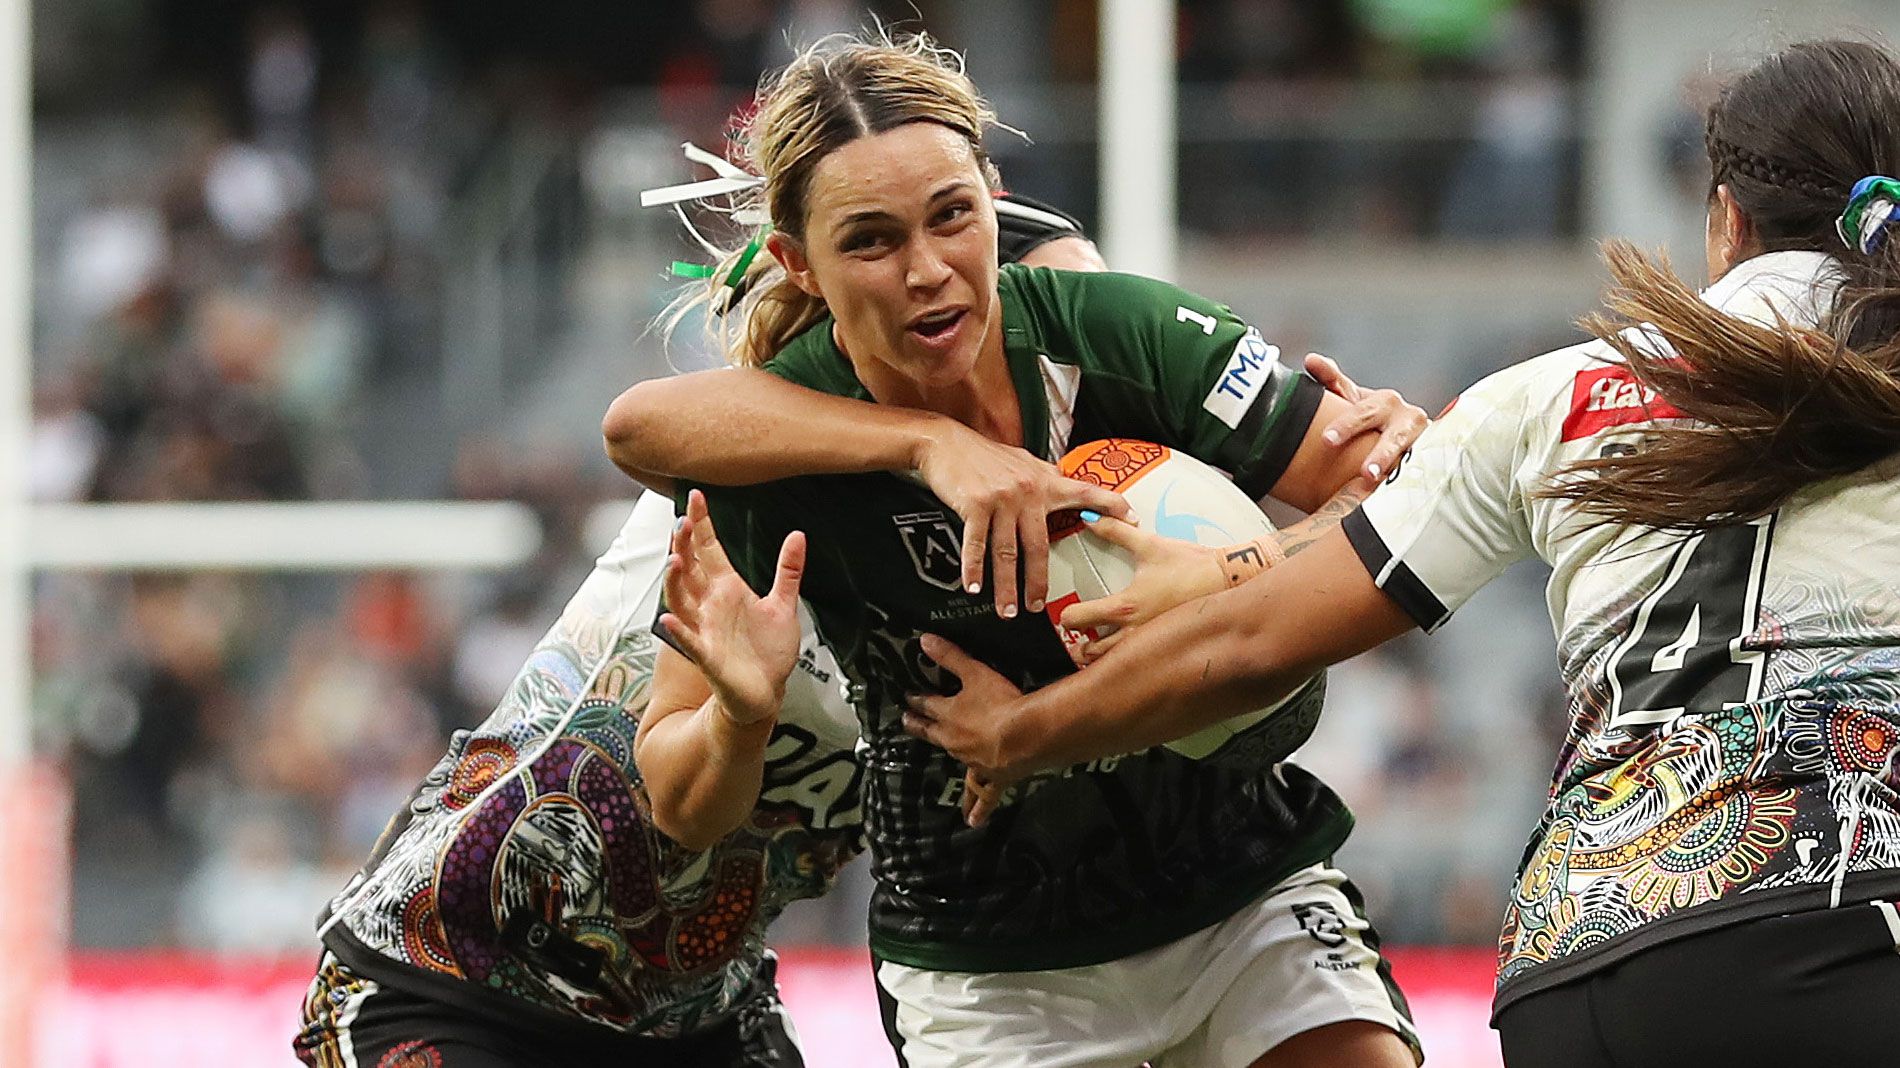 Botille Vette-Welsh, pictured playing for the Maori All Stars, is one of the superstars of the NRLW competition.